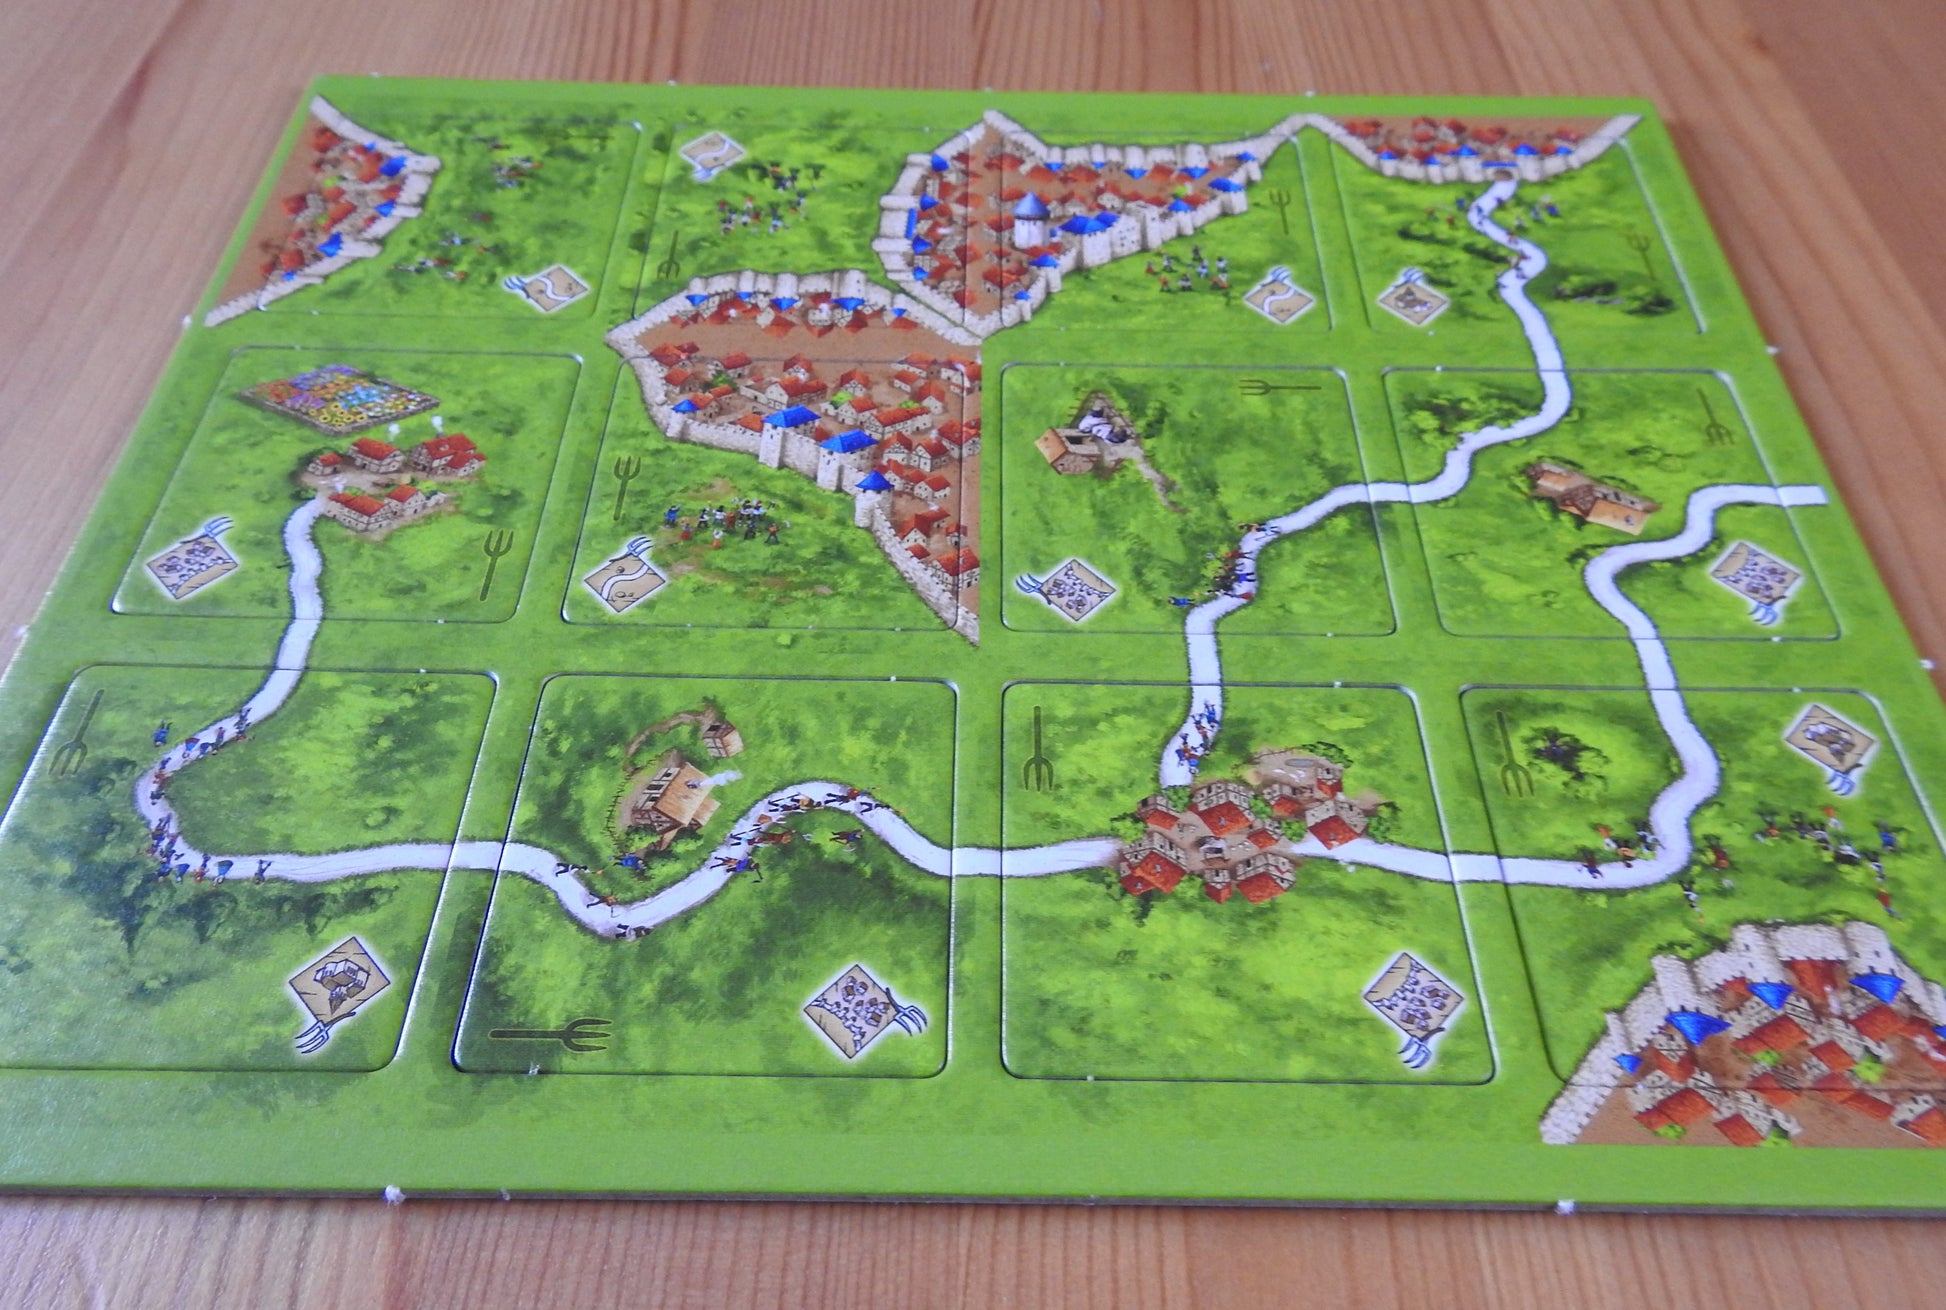 A view from a lower angle of all 12 included tiles in this Peasant Revolts mini expansion for Carcassonne.